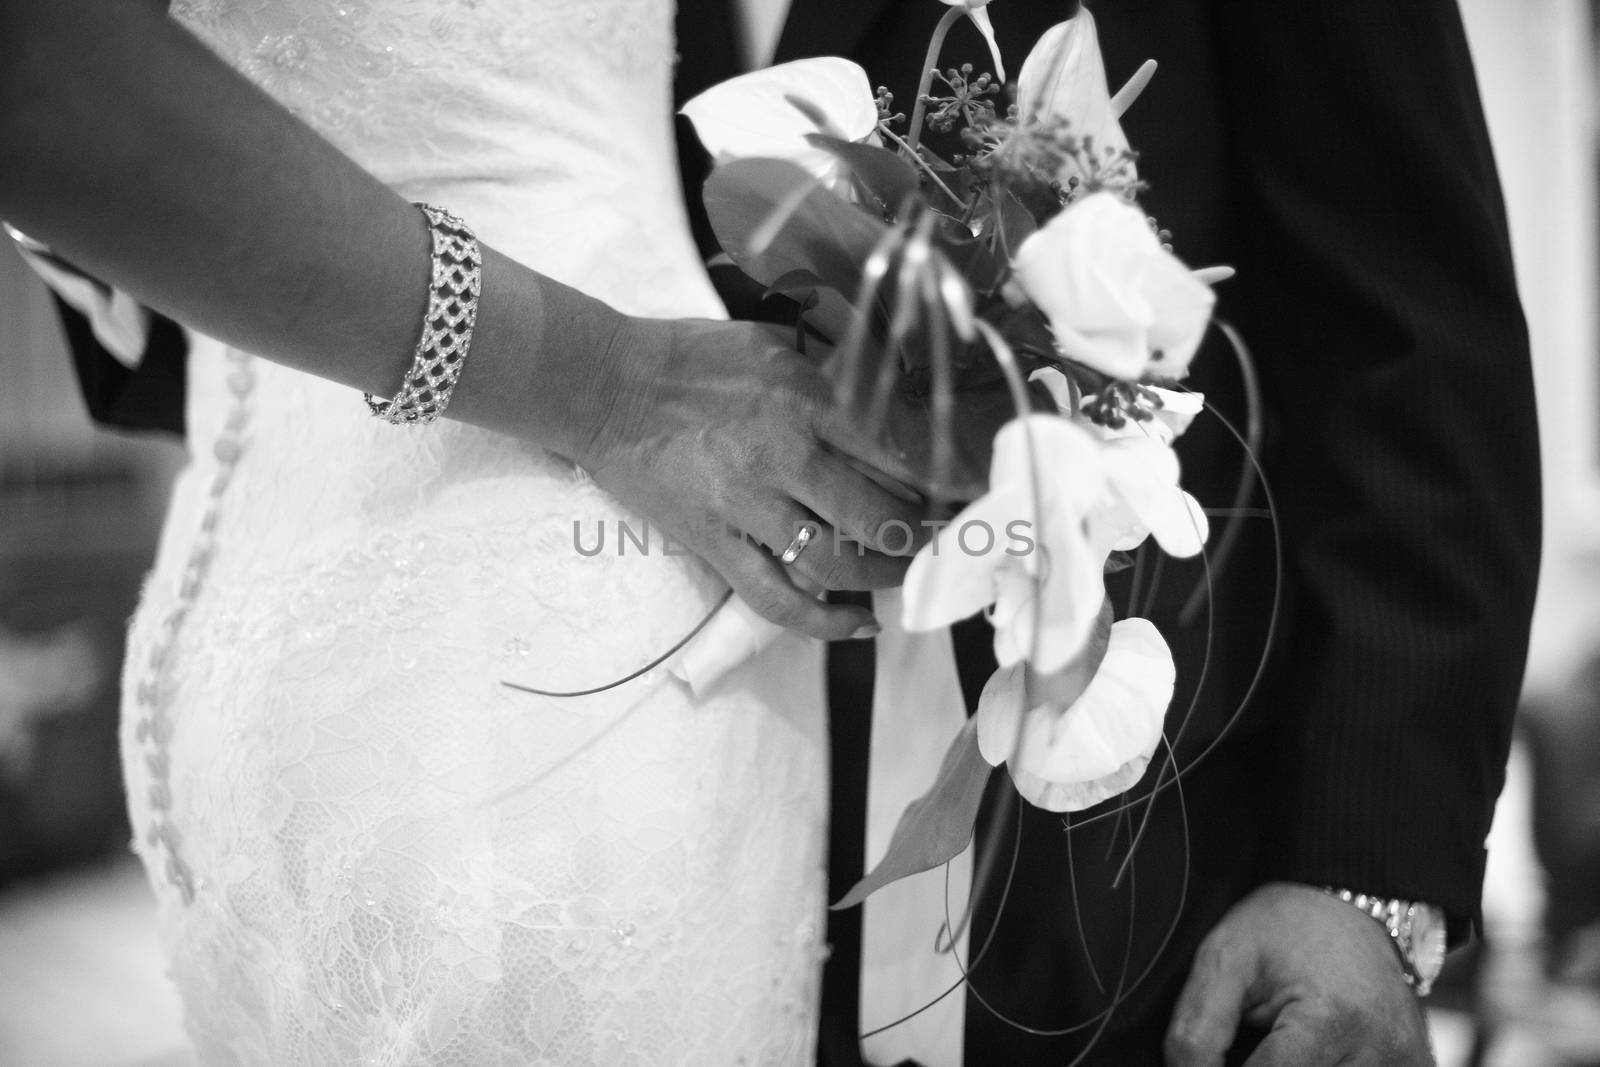 Black and white artistic digital photo of bridegroom in dark suit in wedding marriage event holding hands with the bride in white long wedding bridal dress. Shallow depth of with background out of focus. 